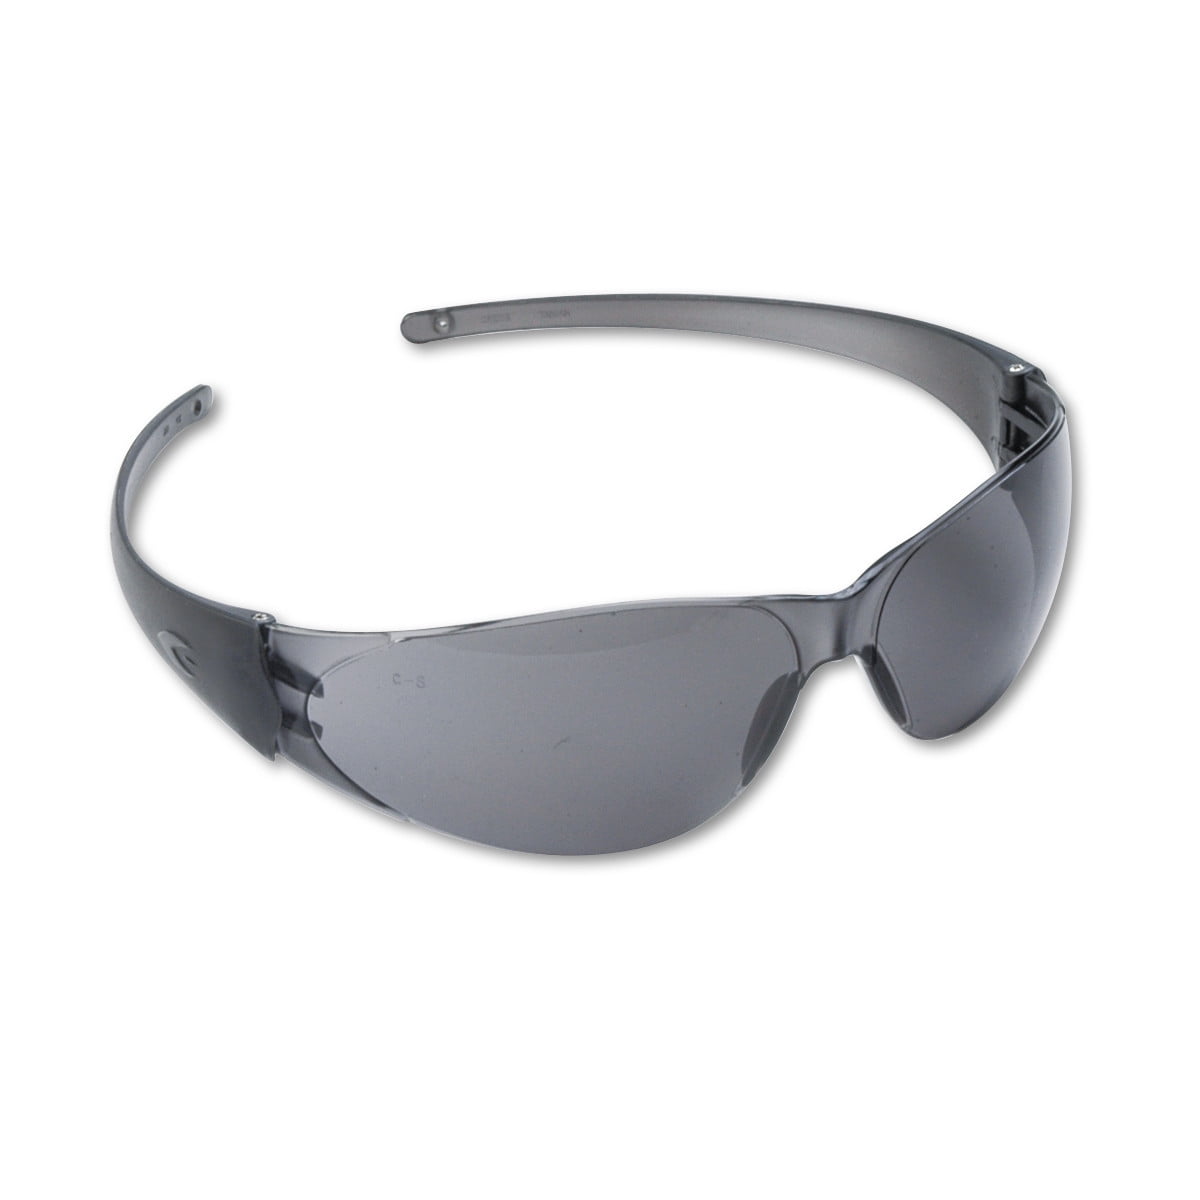 Crews Cl010 Checklite Clear Safety Glasses 1 Each for sale online 